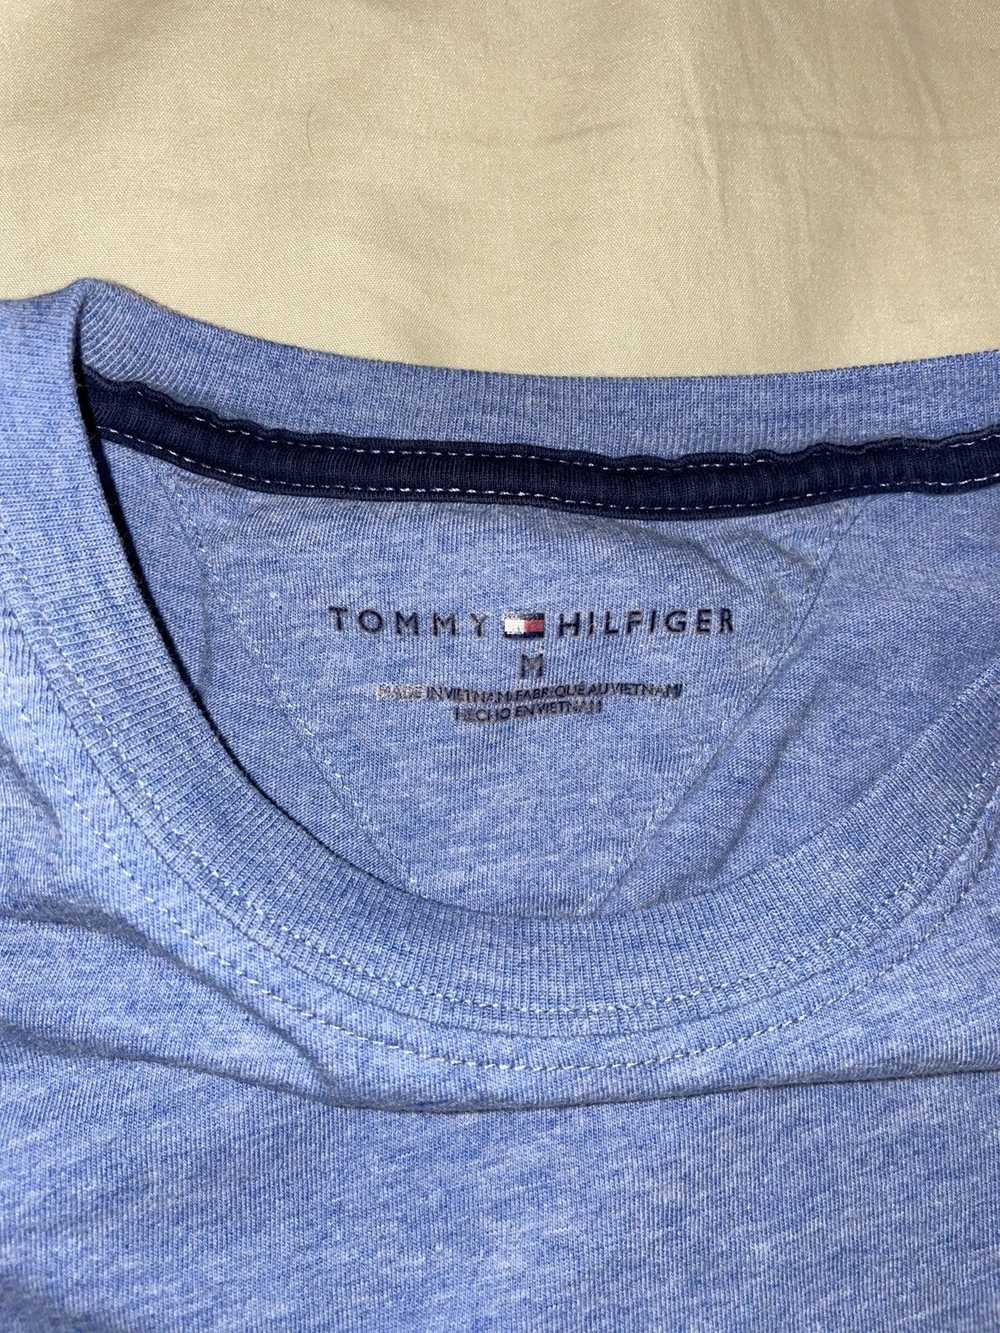 Tommy Hilfiger Tommy Hilfiger Tee Sz M Embroidered - image 3